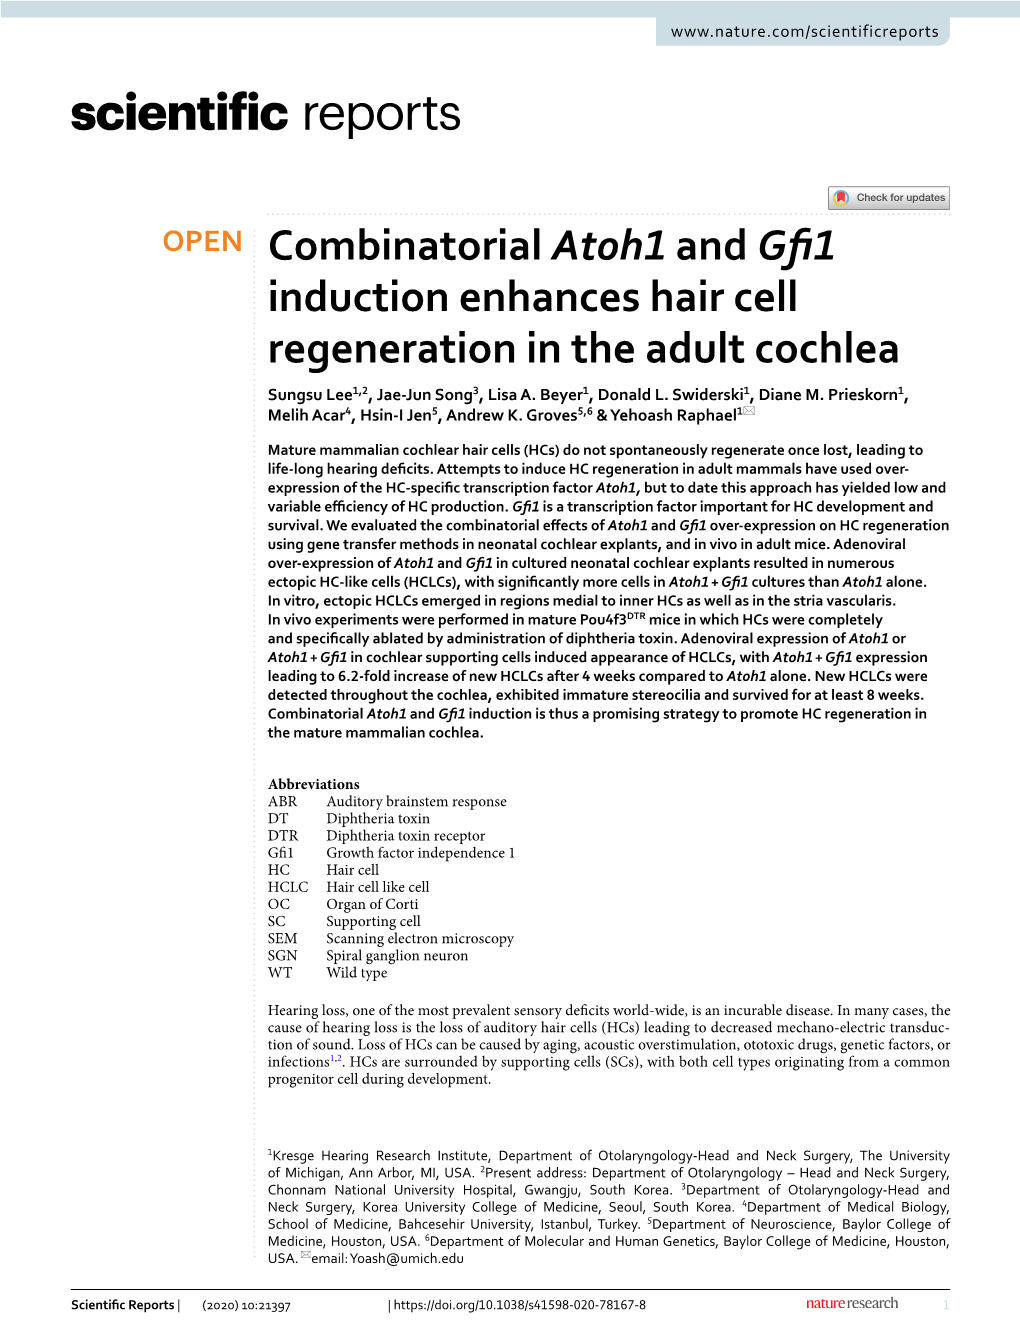 Combinatorial Atoh1 and Gfi1 Induction Enhances Hair Cell Regeneration in the Adult Cochlea